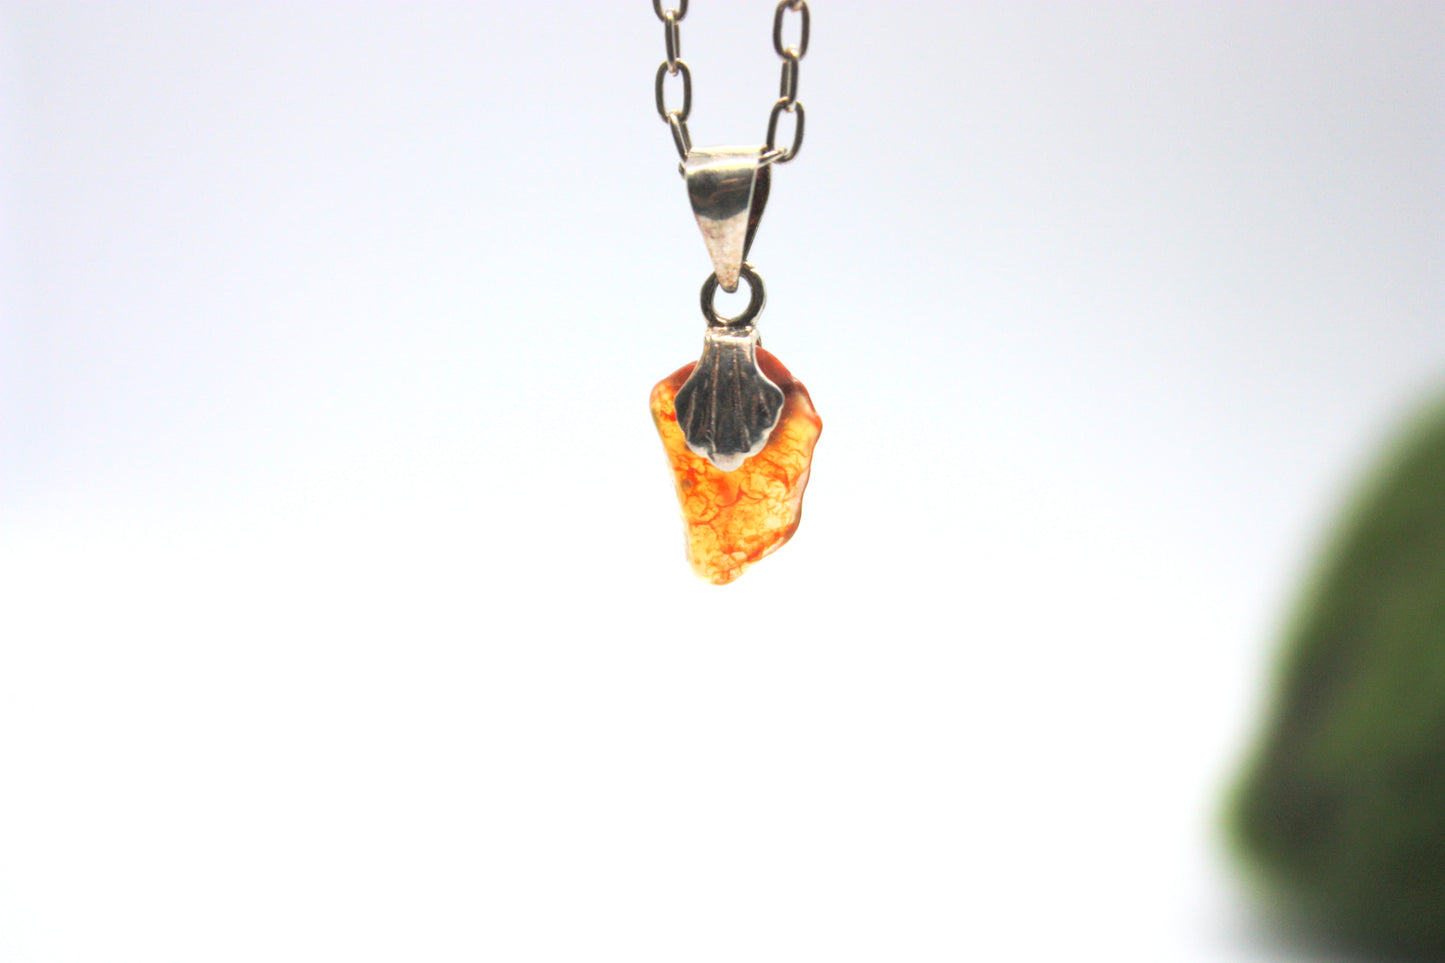 Minimalist Sterling Silver Necklace and Orange Charm